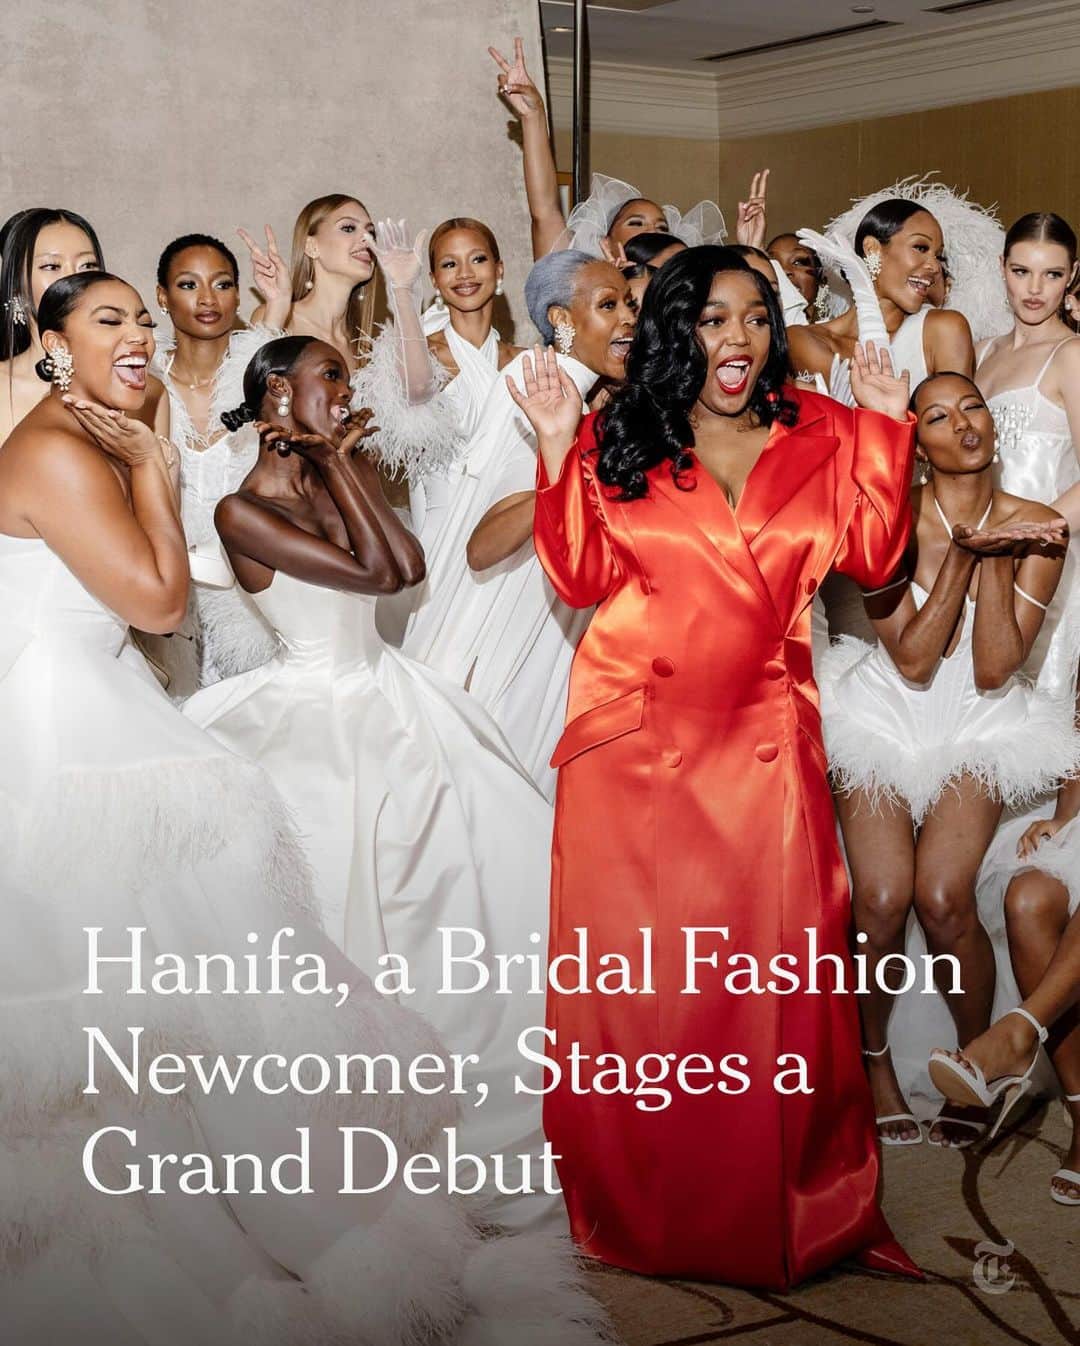 New York Times Fashionのインスタグラム：「Anifa Mvuemba, the founder of the clothing brand Hanifa, presented her first bridal collection, inspired by a luxury wedding complete with a cocktail hour and after-party in Middleburg, Virginia.  @hanifaofficial has a fervent fan base, loyal to Mvuemba’s vibrant dresses and knitwear. Now, Mvuemba is expanding into the bridal space, inadvertently closing Bridal Fashion Week, which took place Oct. 10-12 in New York. She presented her debut collection outdoors at the Salamander Resort and Spa, a Black-owned, women-owned luxury resort.  The event was set up like a wedding, all that was missing was a ring exchange. Women in matching pink custom Hanifa jumpsuits greeted guests, many of whom were dressed in cocktail attire from Hanifa’s previous collections.  See more from the show at the link in our bio. Photos by @jasoncandrew」